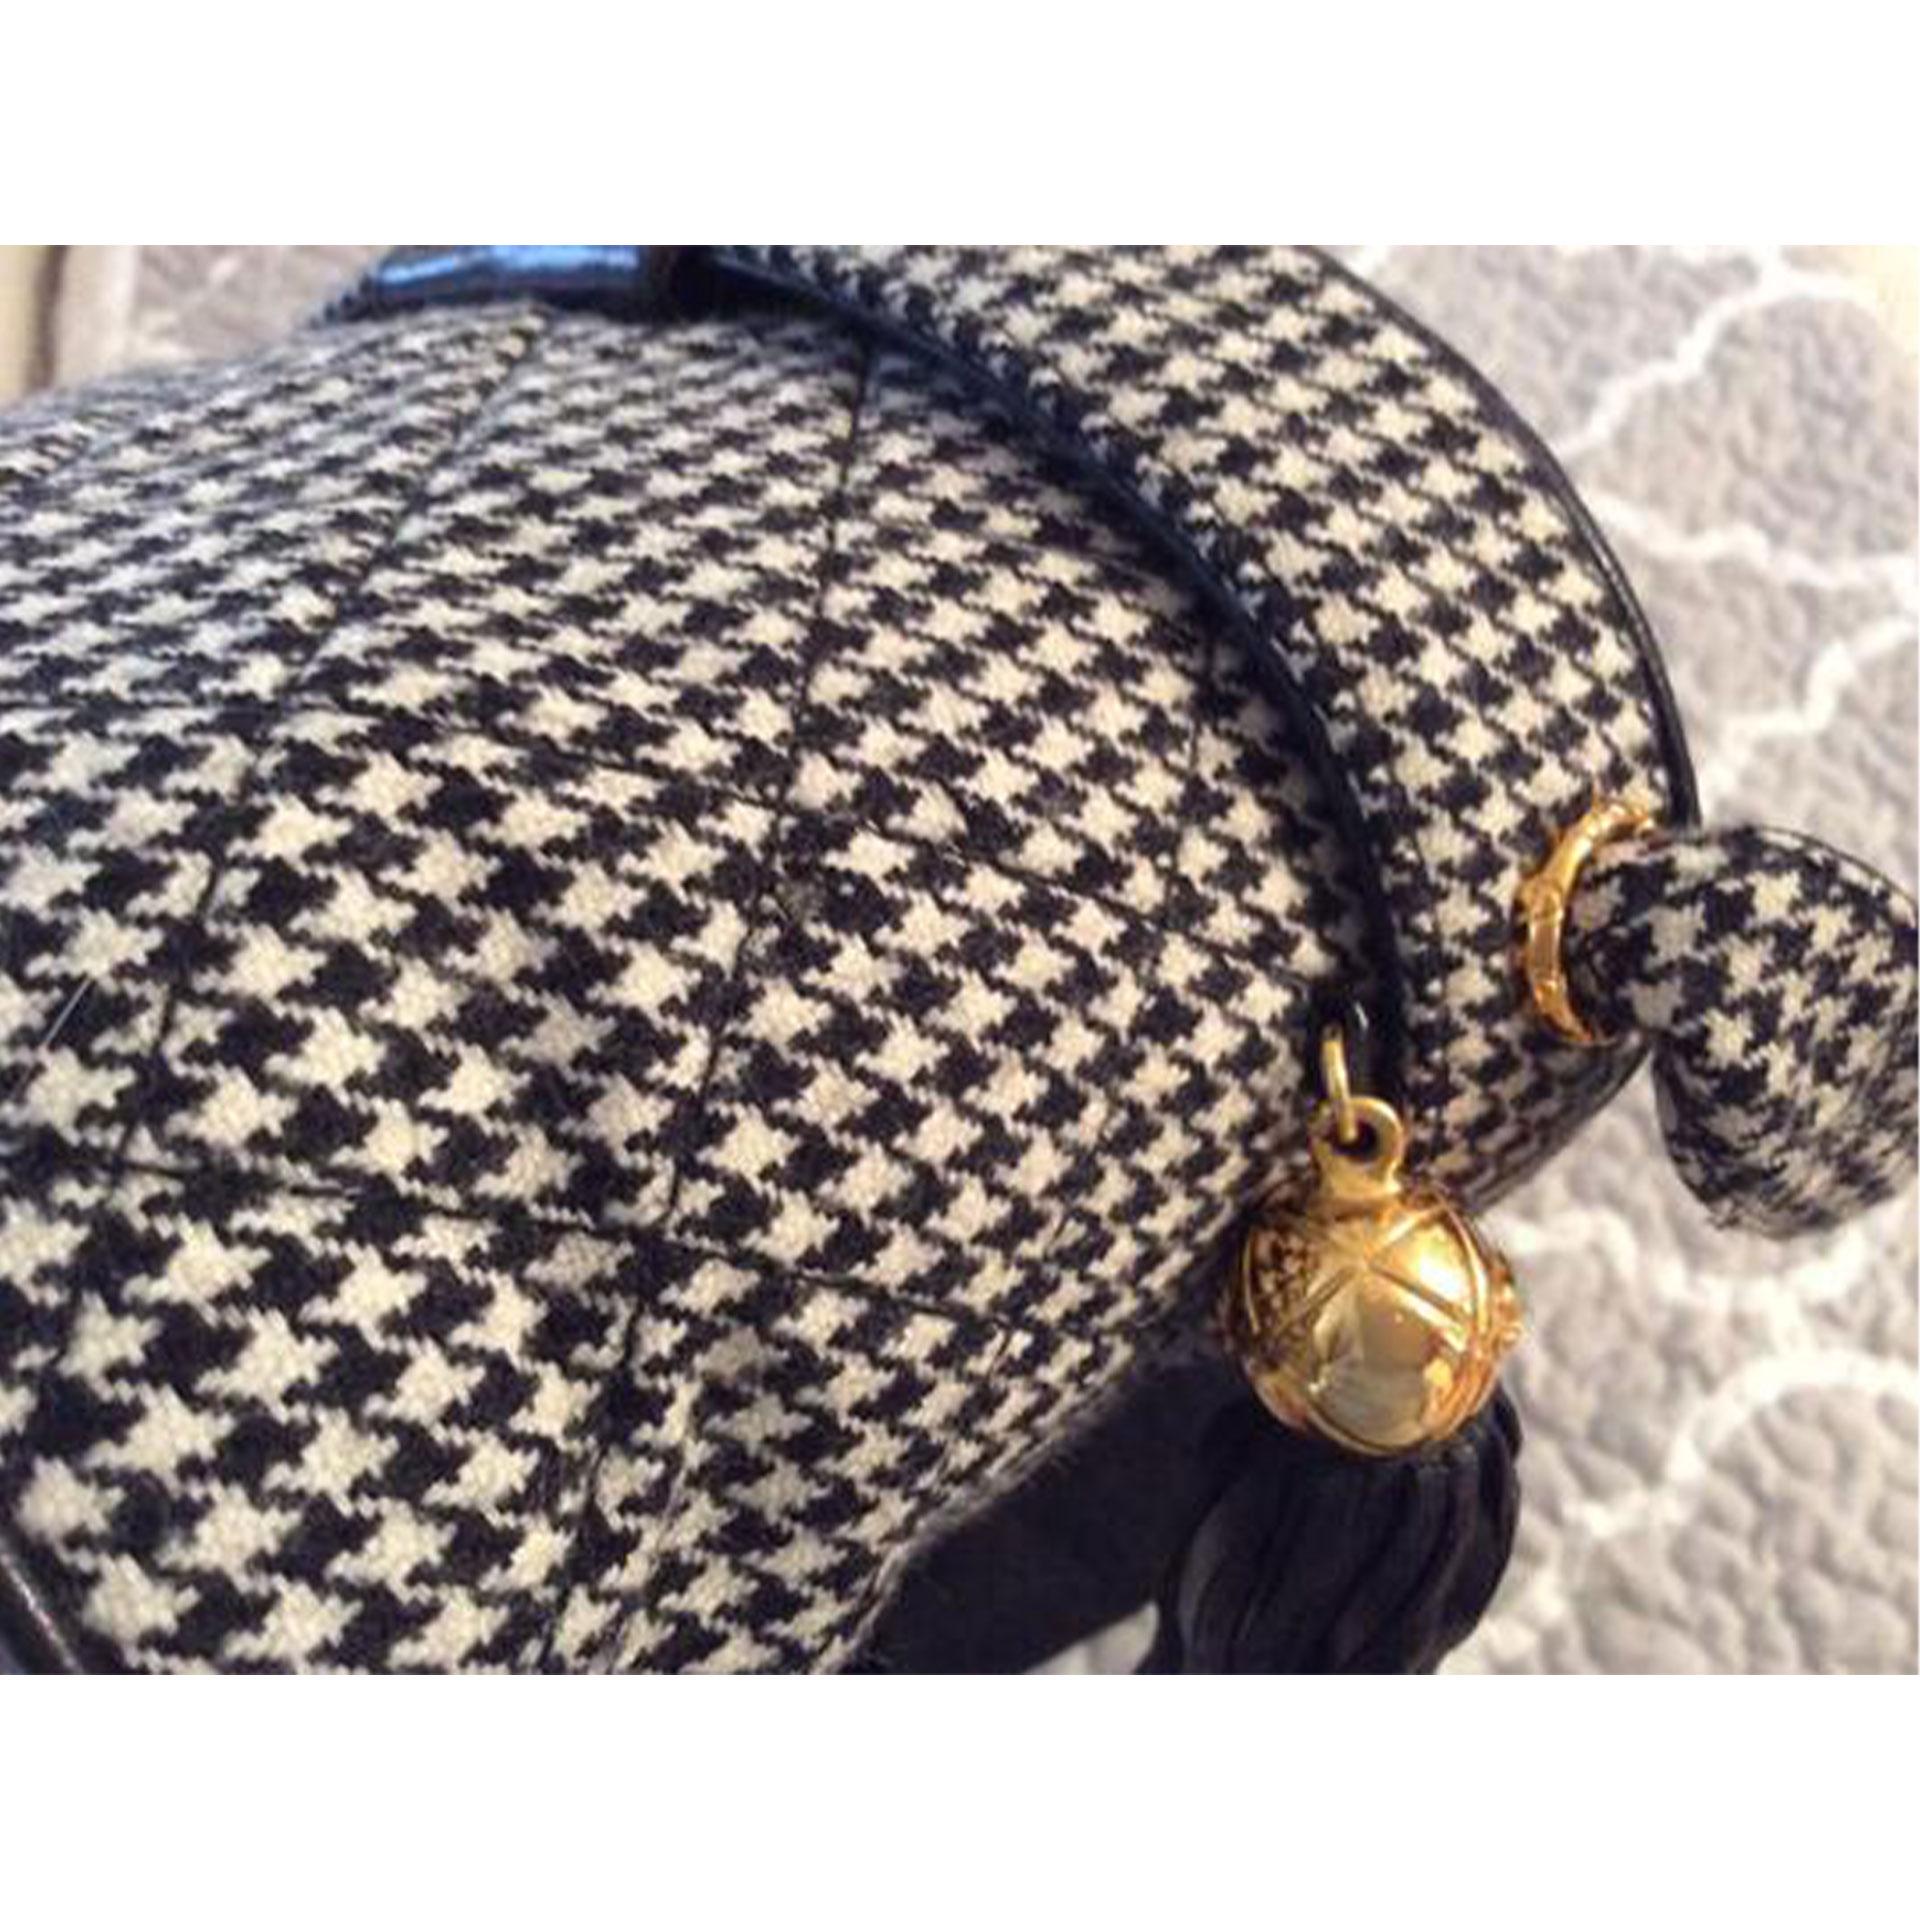 Chanel Vanity Case Very Rare Vintage 1990’s Houndstooth Black and White Wool Bag For Sale 1